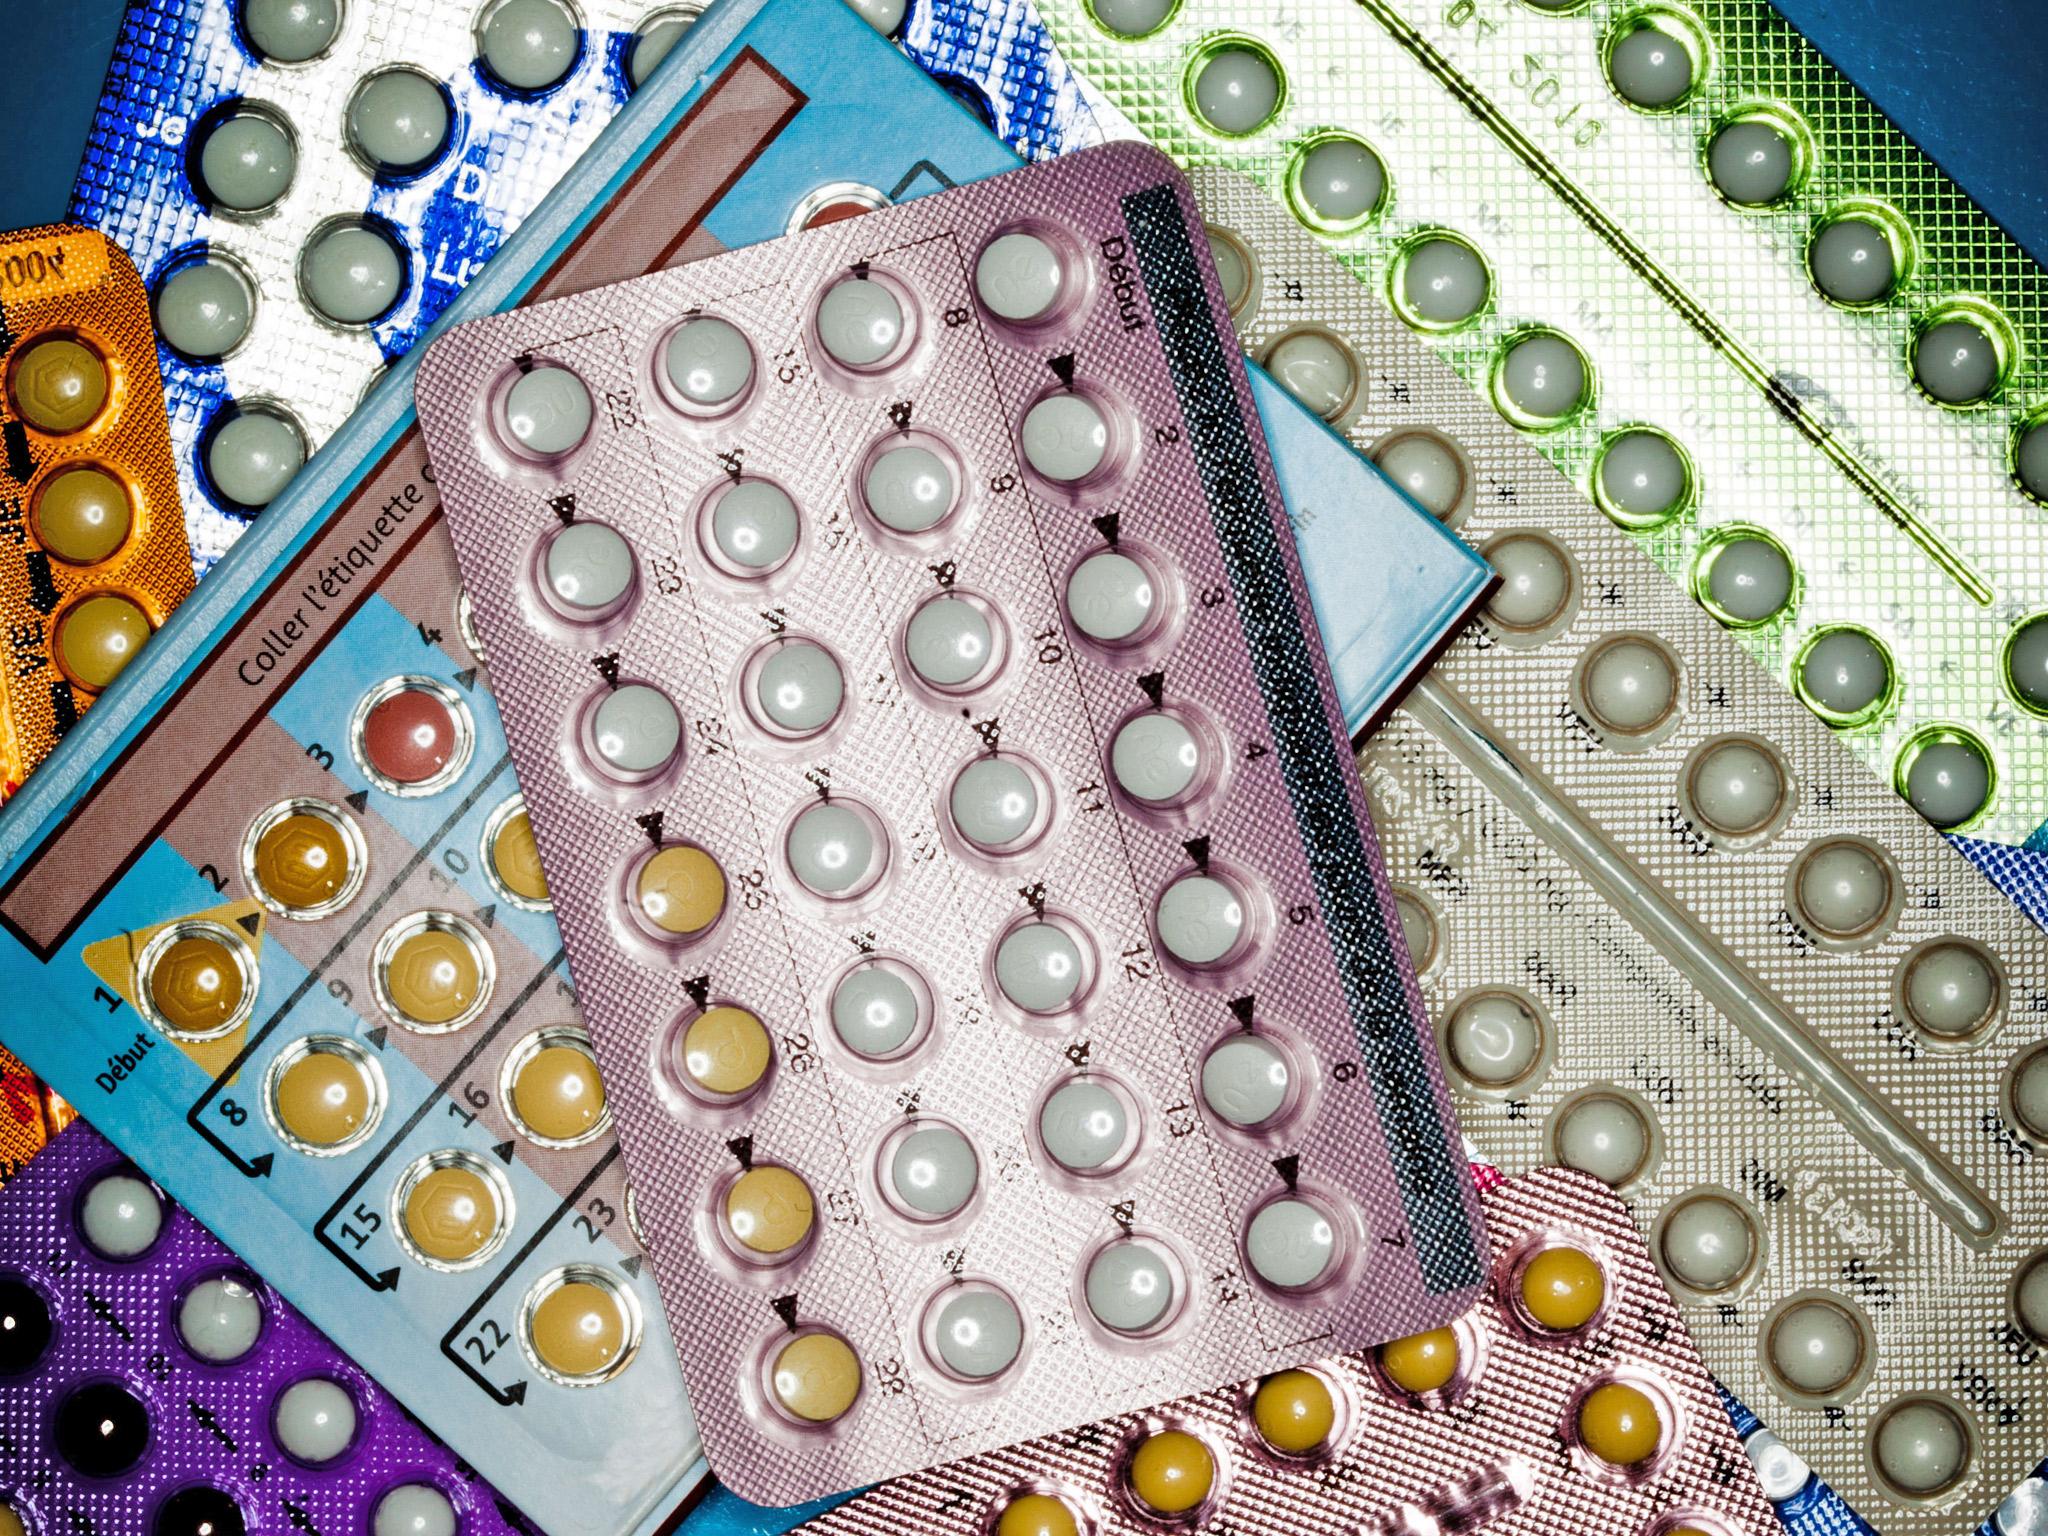 Contraceptive pills could contribute to poor mental health, neuroscientists have found